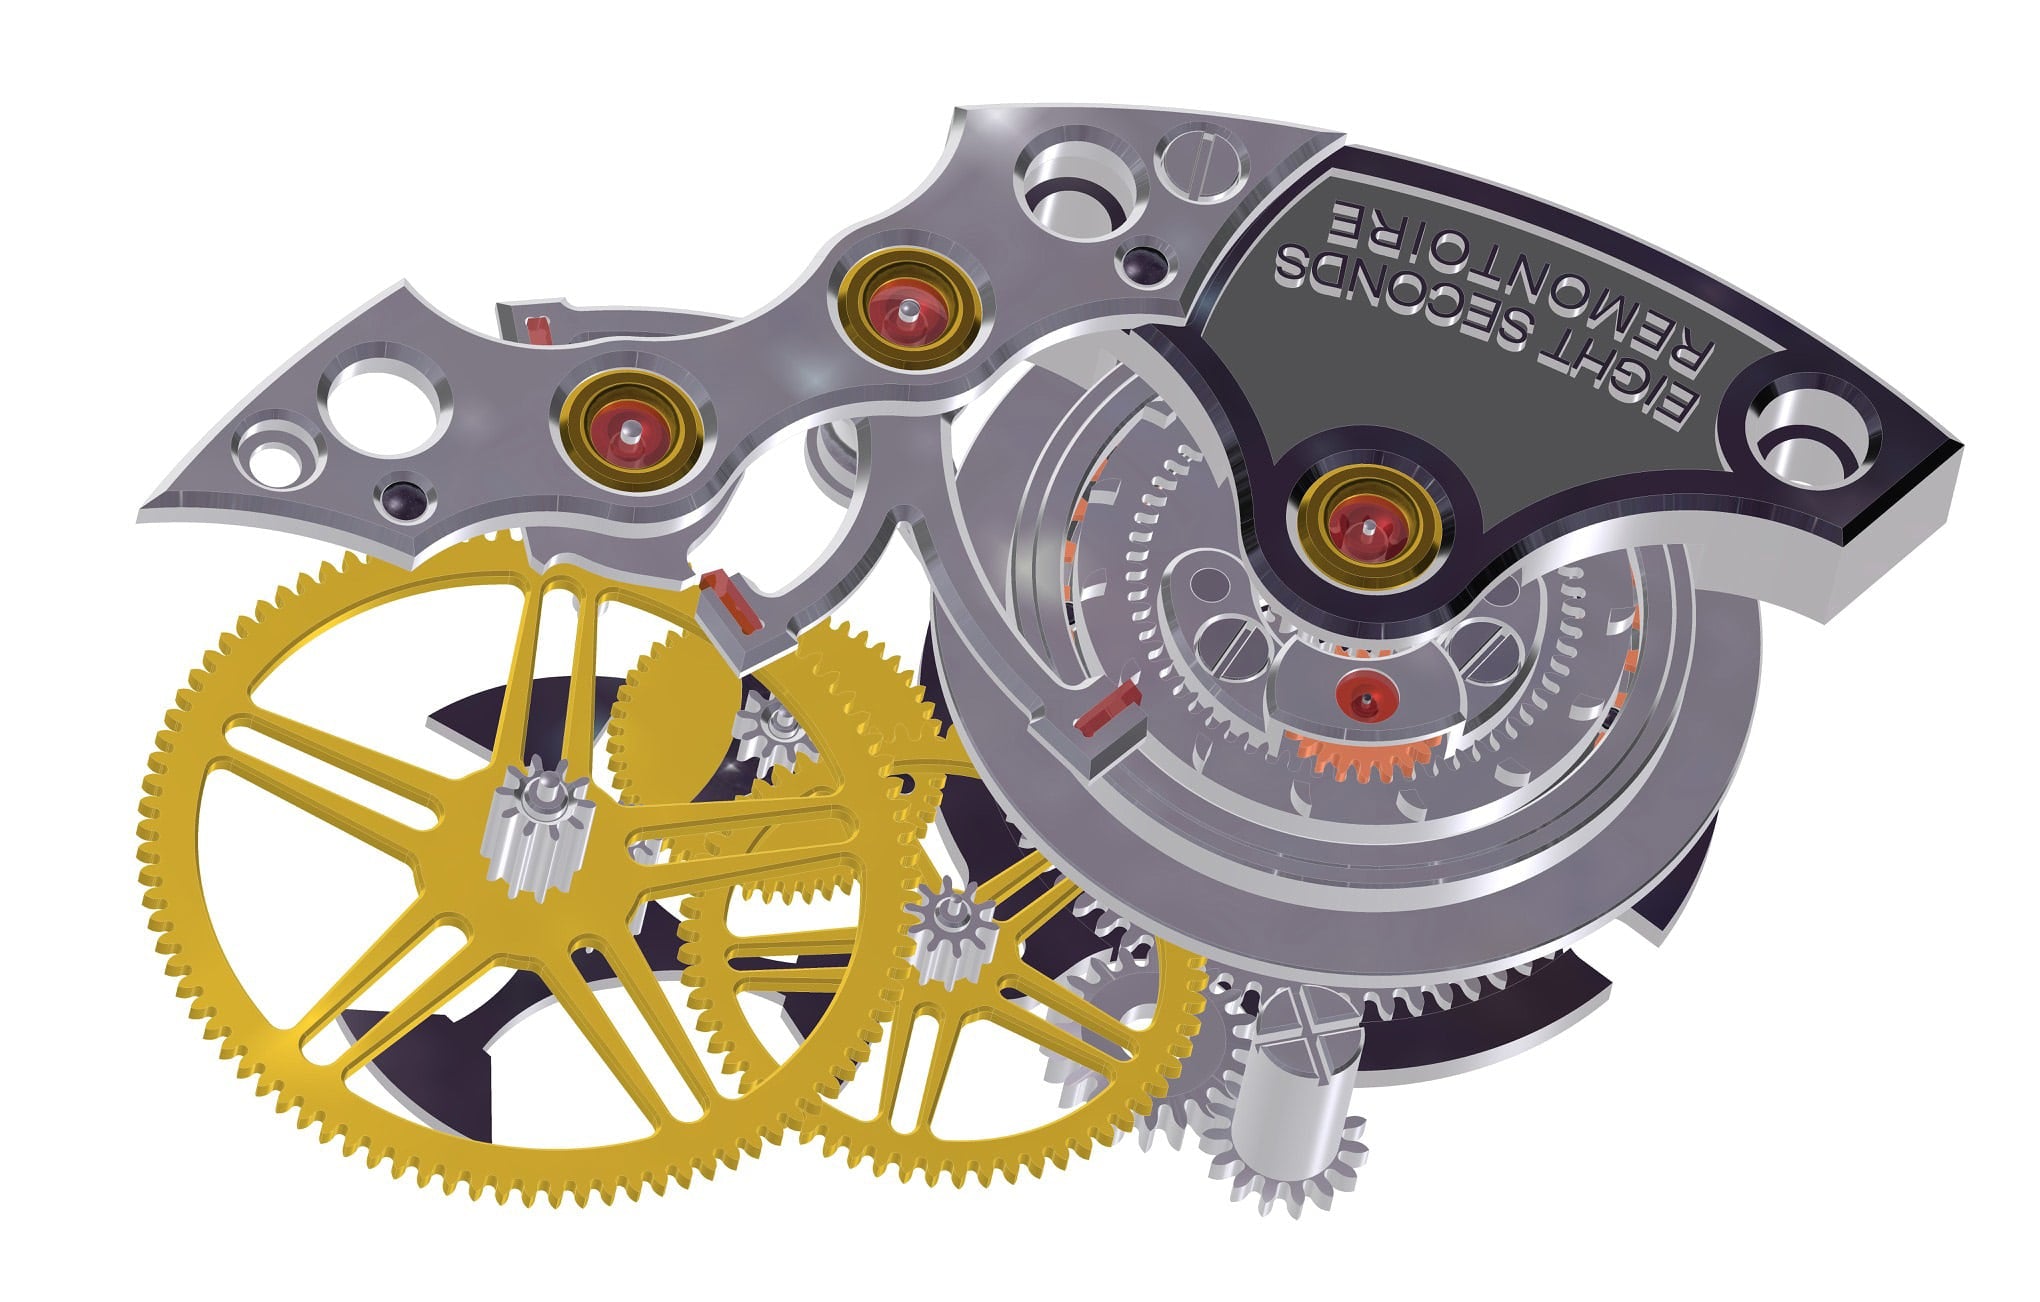 CAD render of remontoire mechanism used inside Grönefeld watches in Chasing Accuracy in Mechanical Wristwatches for A Collected Man London